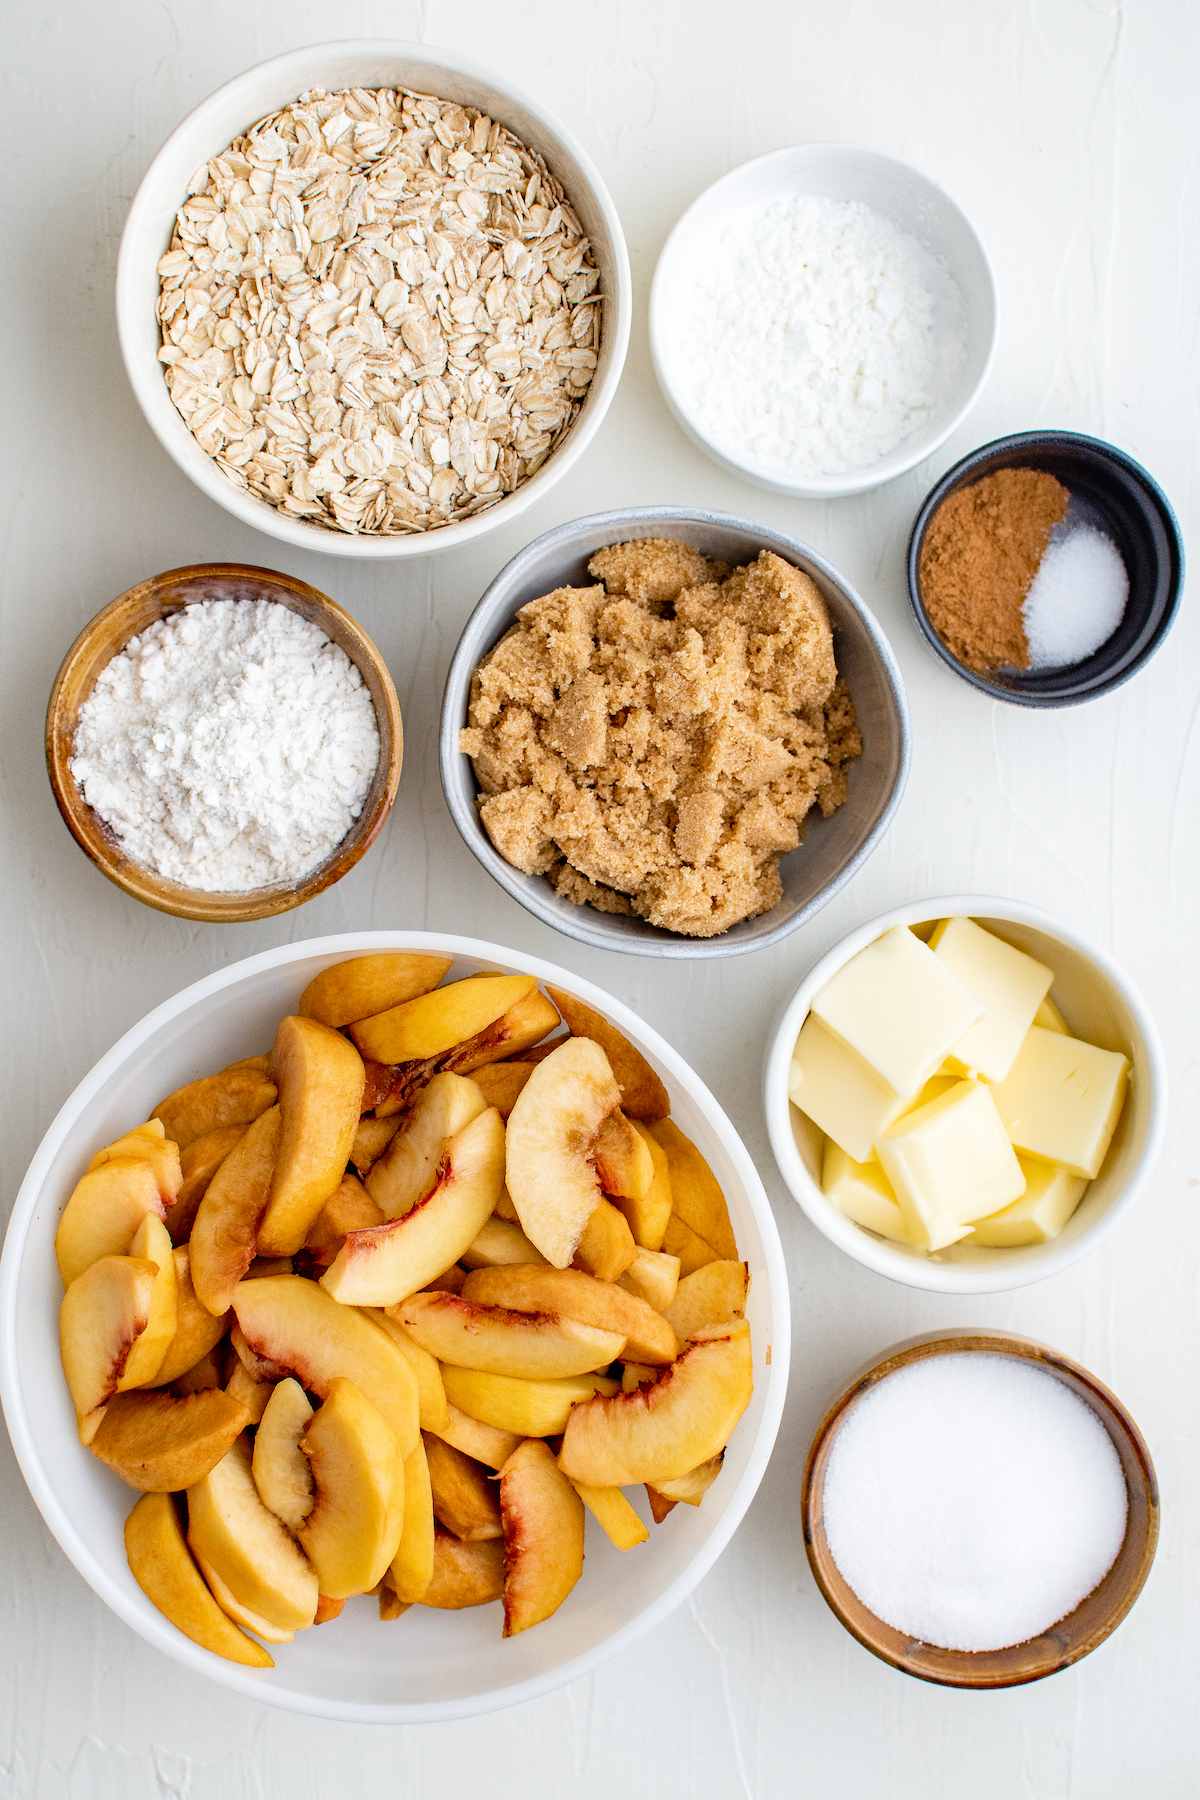 From top left: Rolled oats, cornstarch, flour, brown sugar, spices, peeled and sliced peaches, butter, granulated sugar.